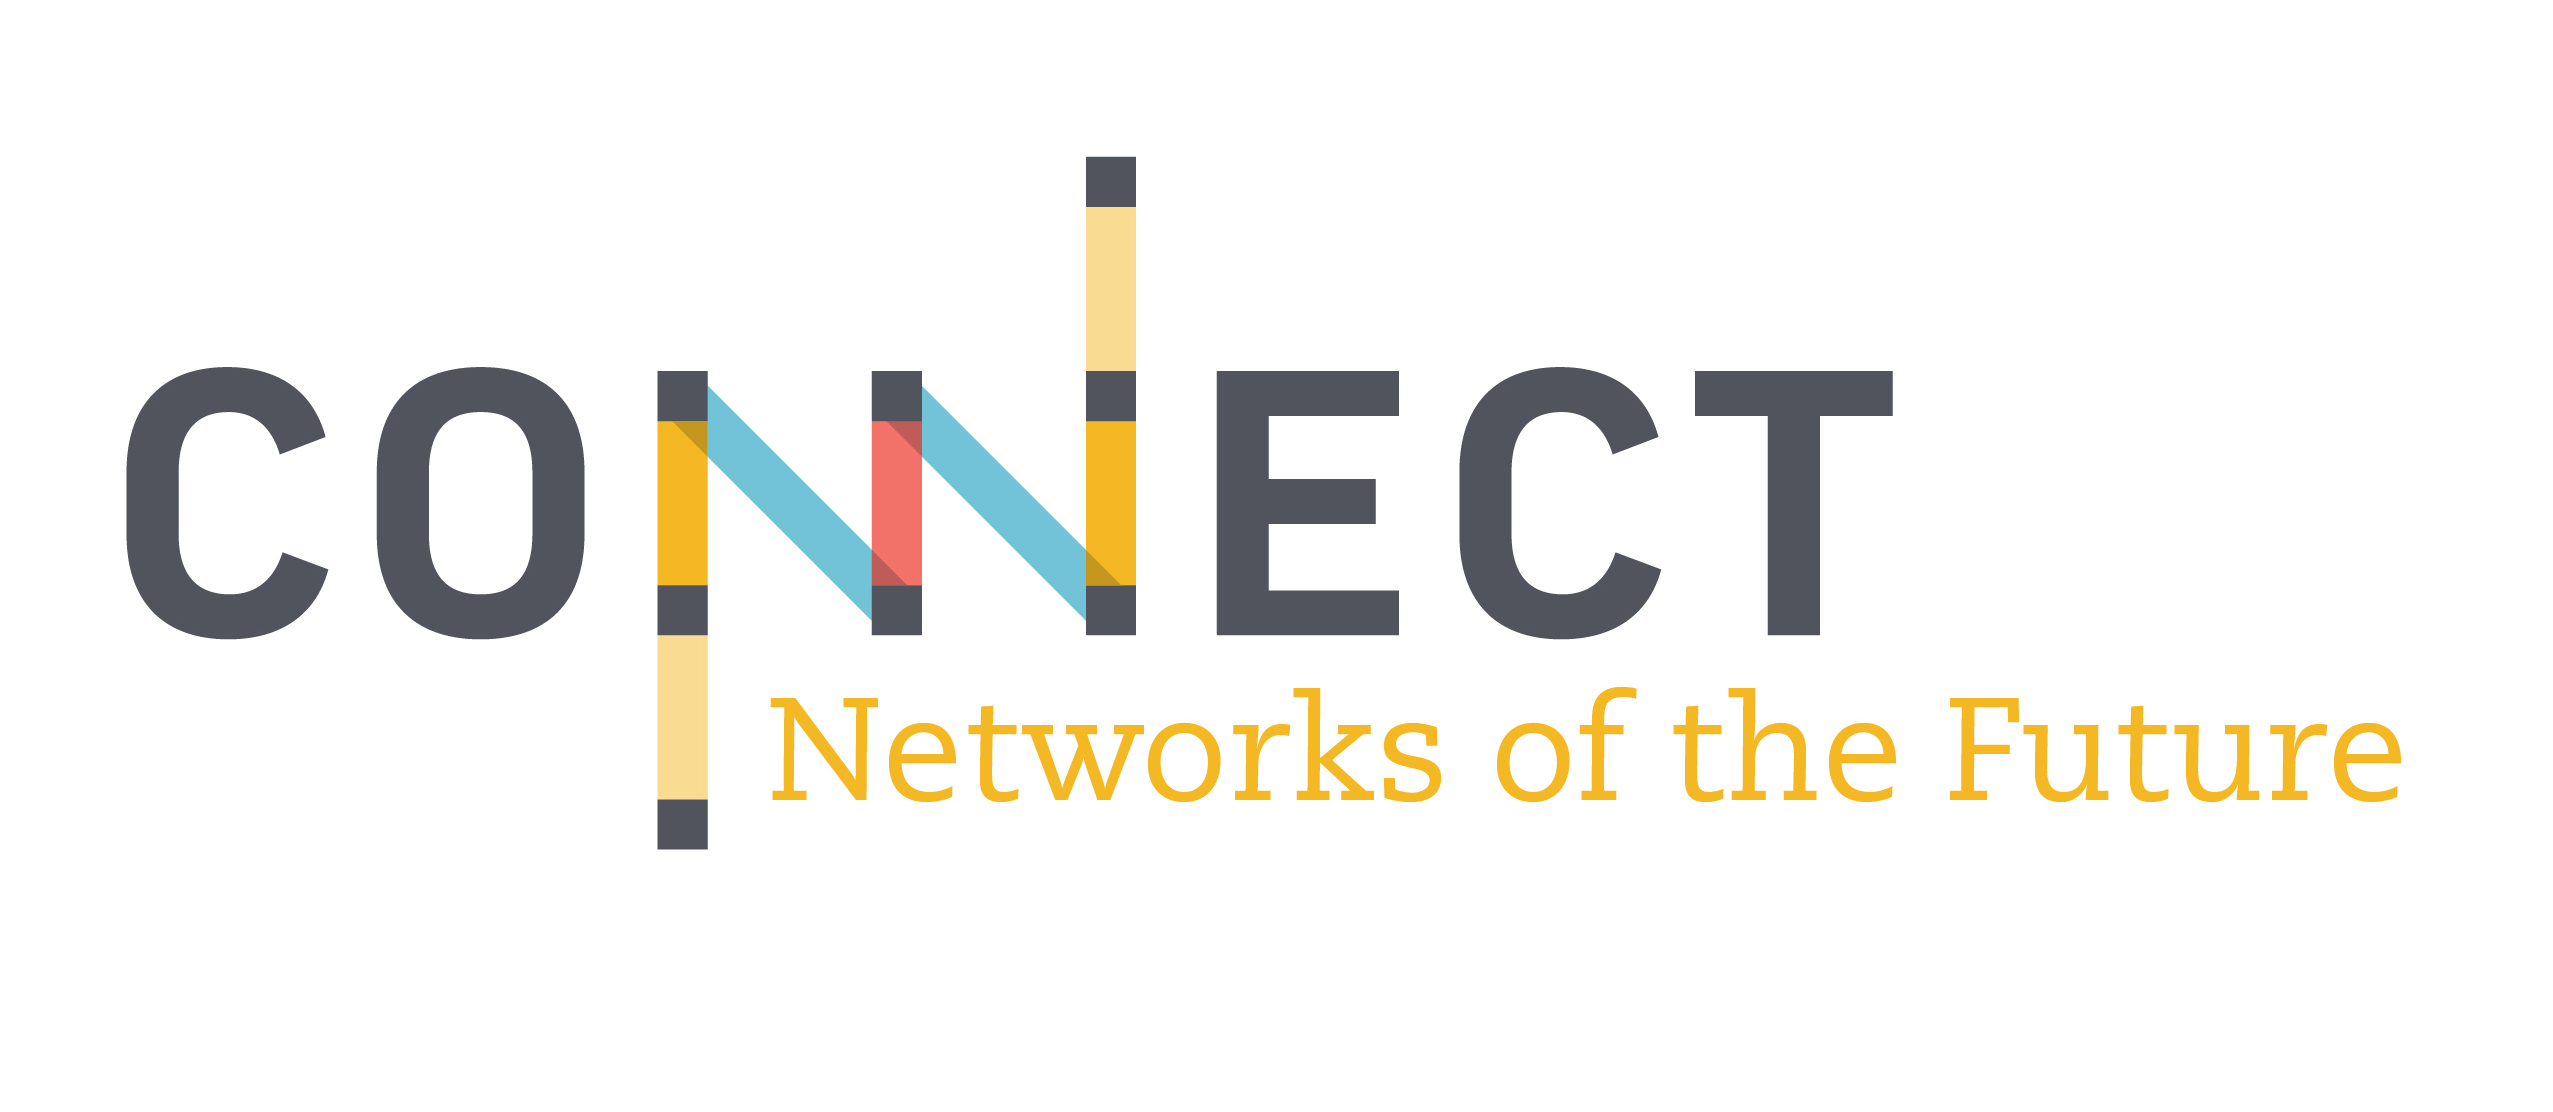 Image of CONNECT logo